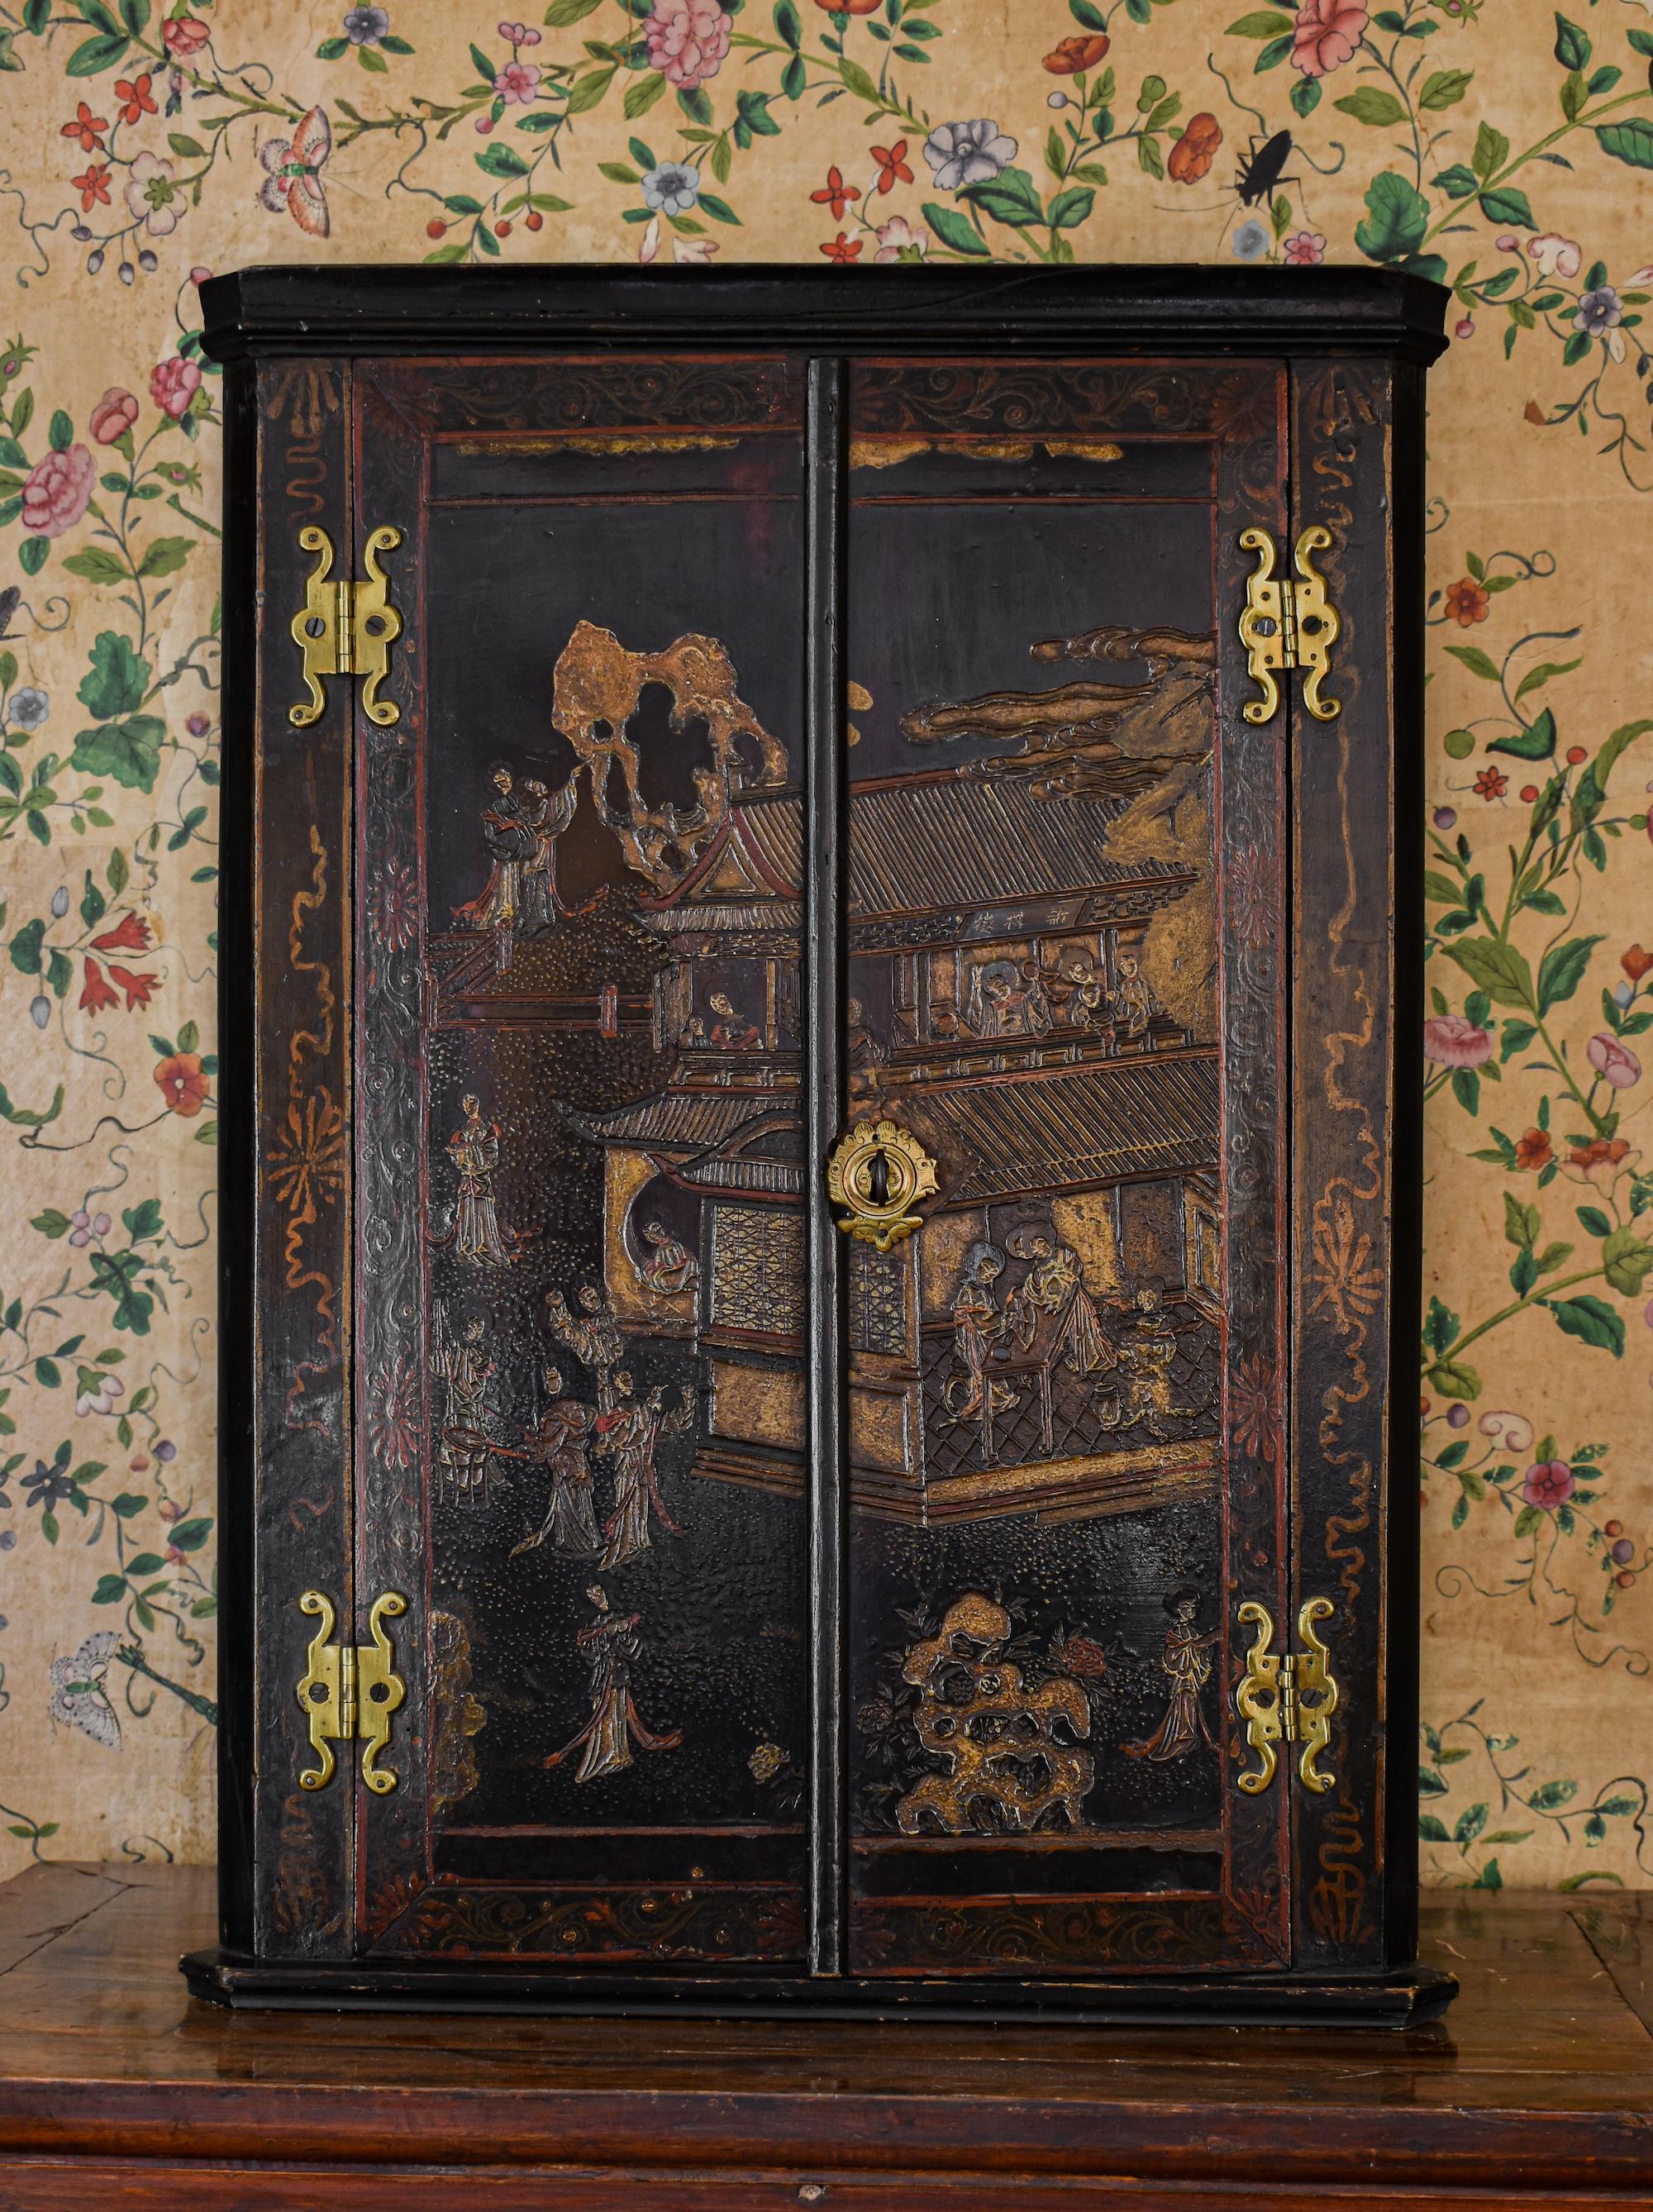 An early-18th century Coromandel lacquer corner cupboard or cabinet.

This is rare - high quality Coromandel lacquer work (incised decoration) - not to be confused with the usual English japanned versions.

This is also referred to as Bantam work,